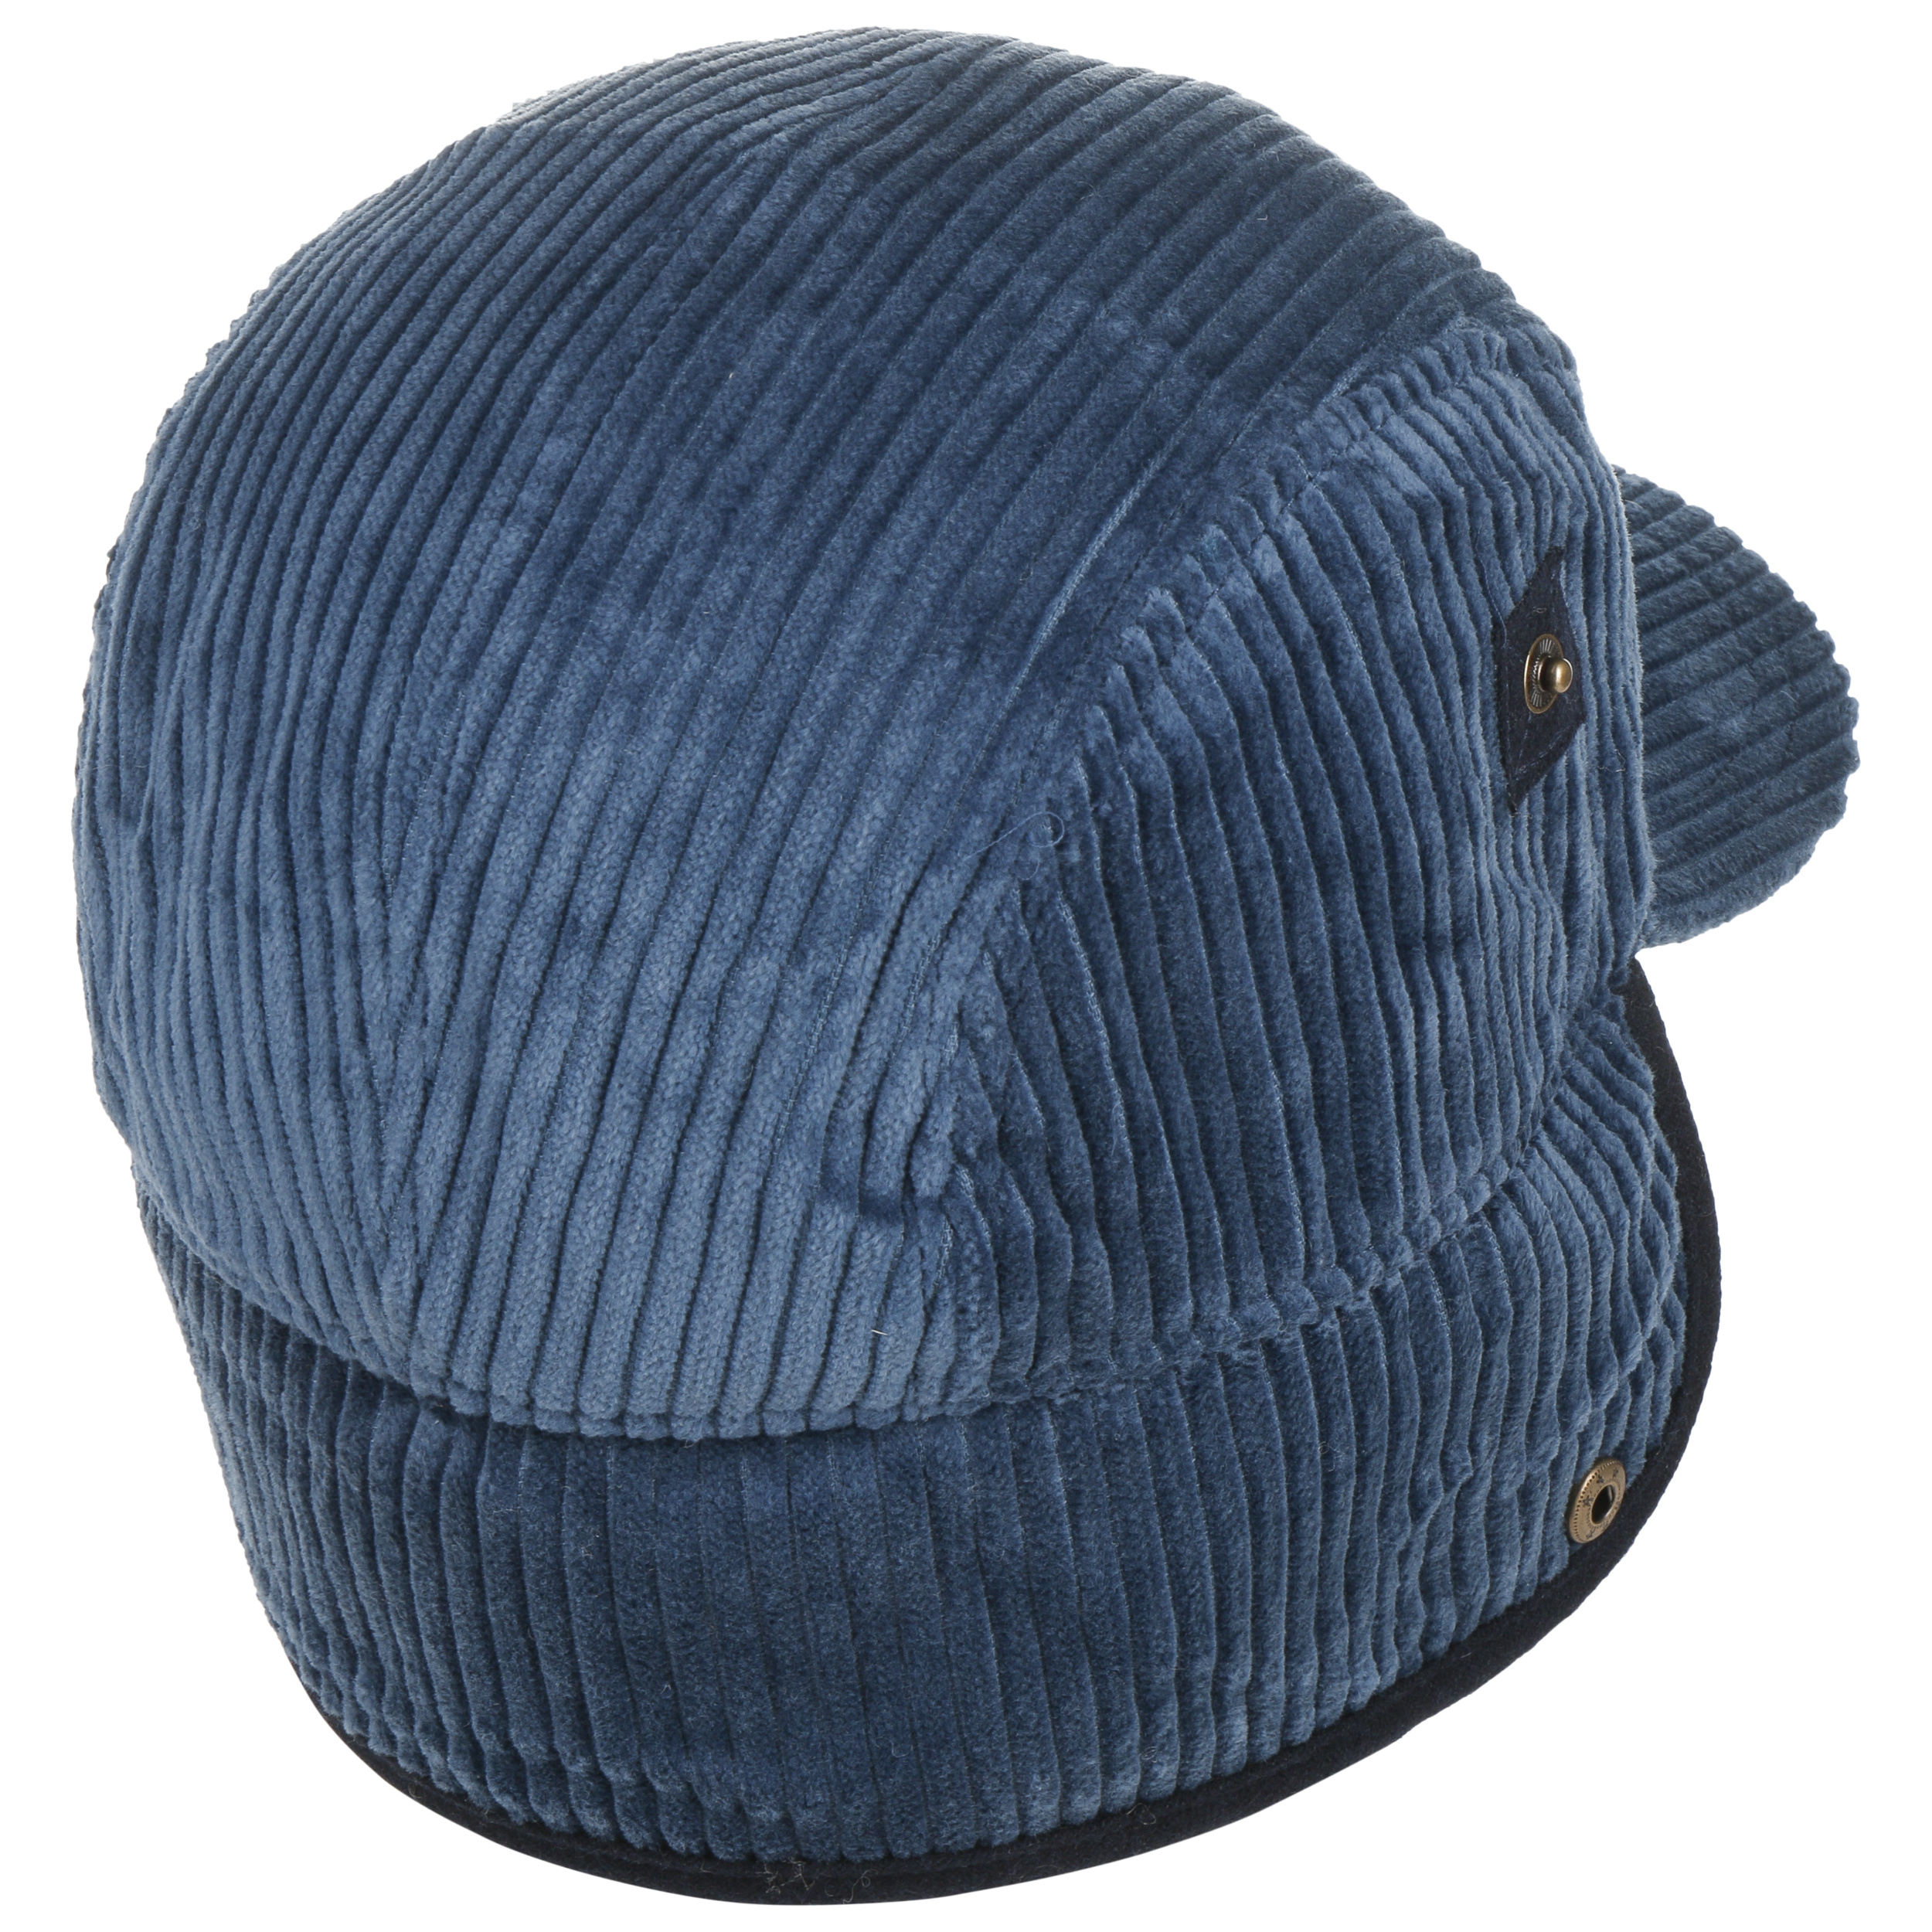 Rayner Cap with Ear Flaps Barts by - £ 35,95